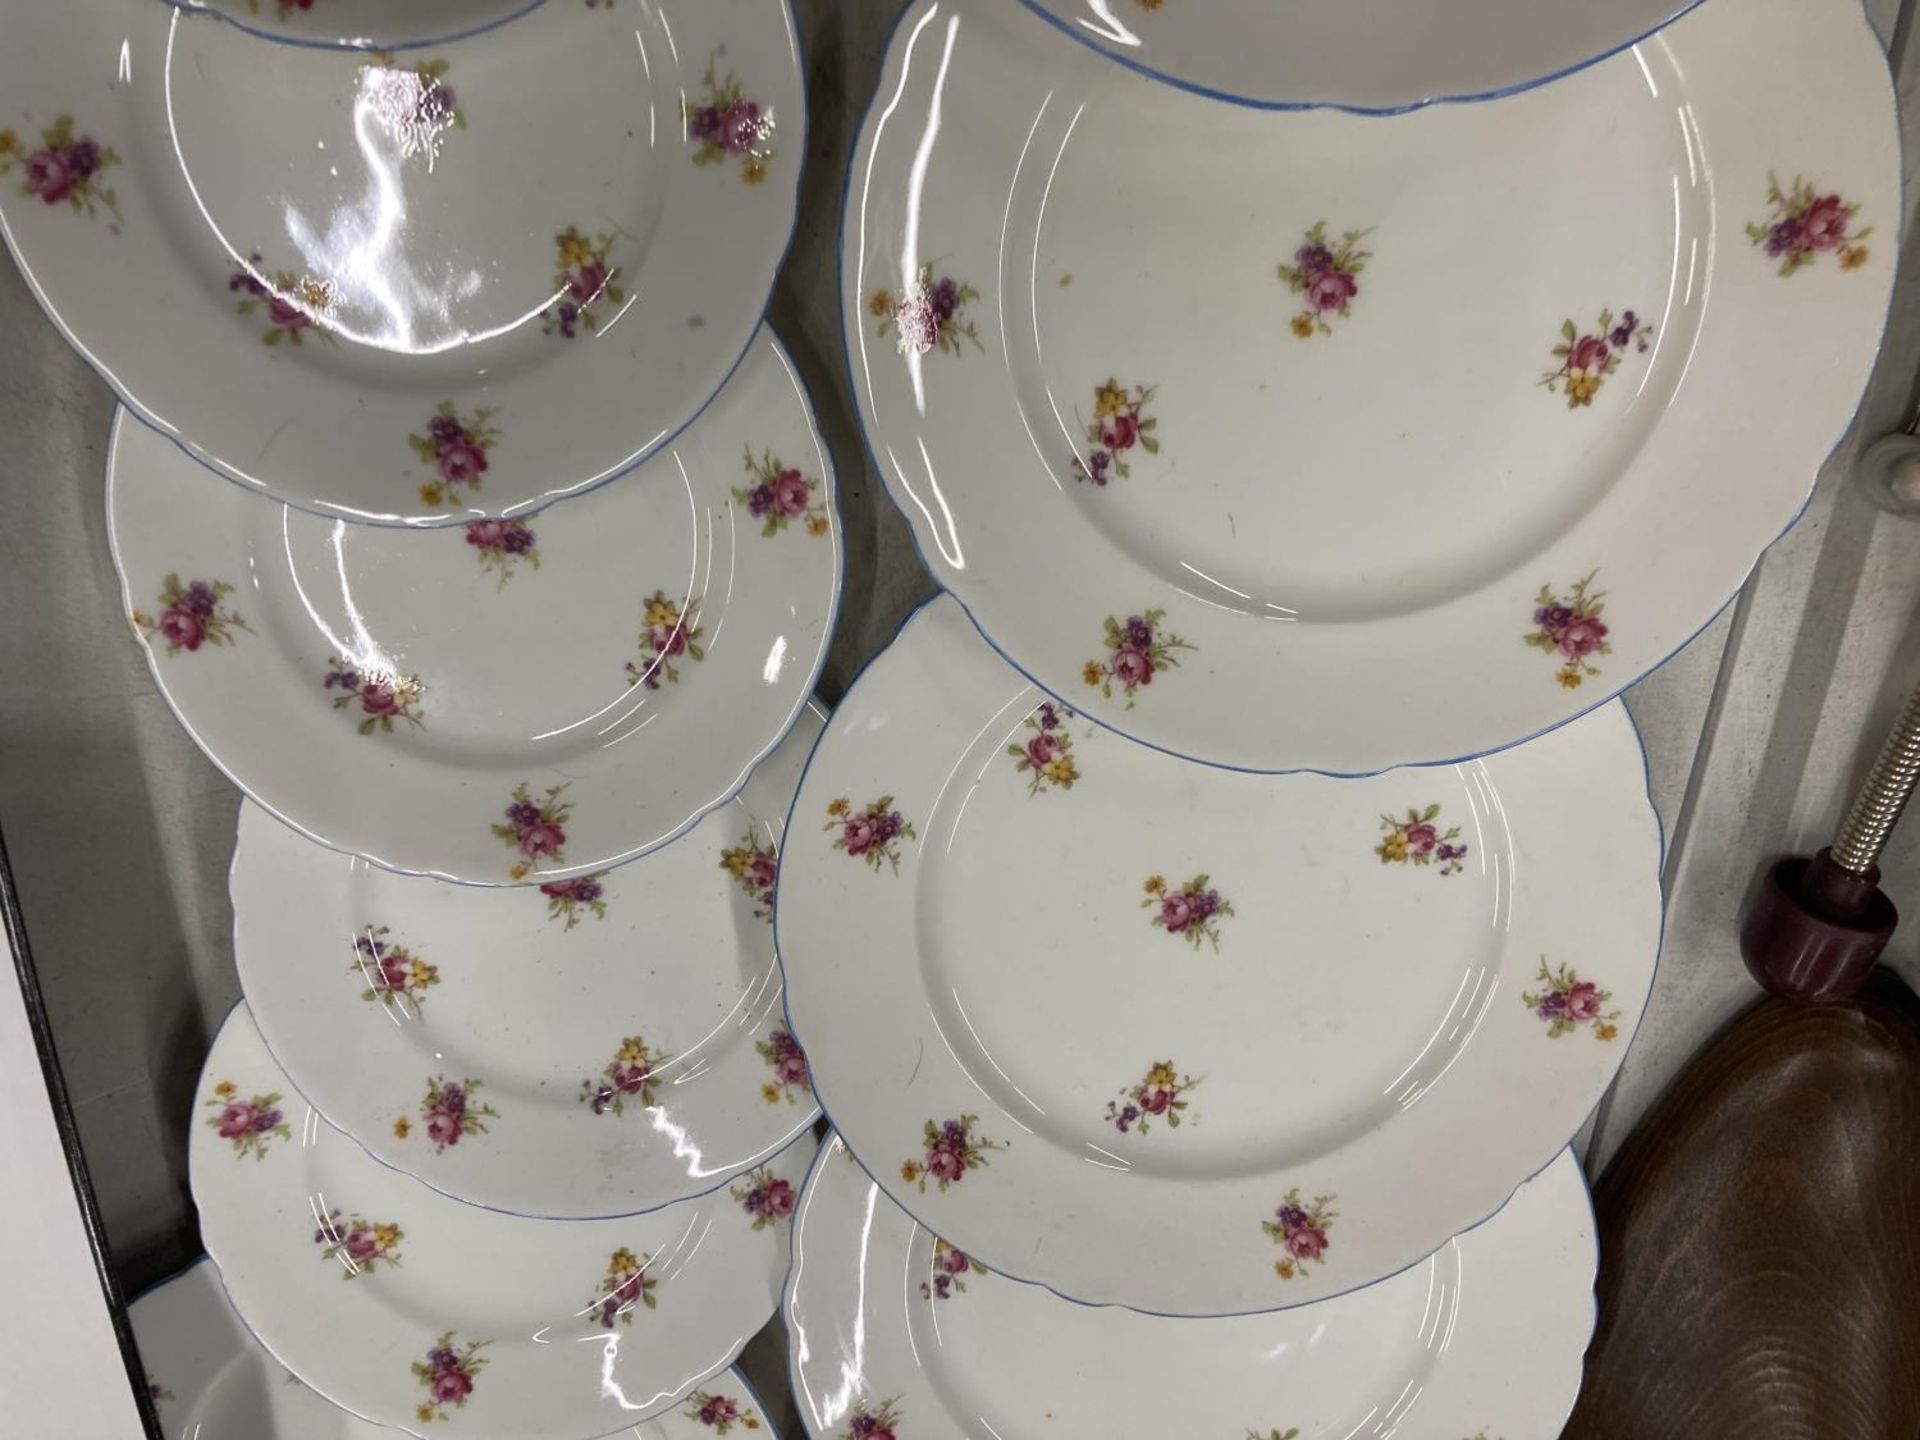 A QUANTITY OF SHELLEY CHINA PLATES WITH A DELICATE FLORAL PATTERN - 12 IN TOTAL - Bild 2 aus 3